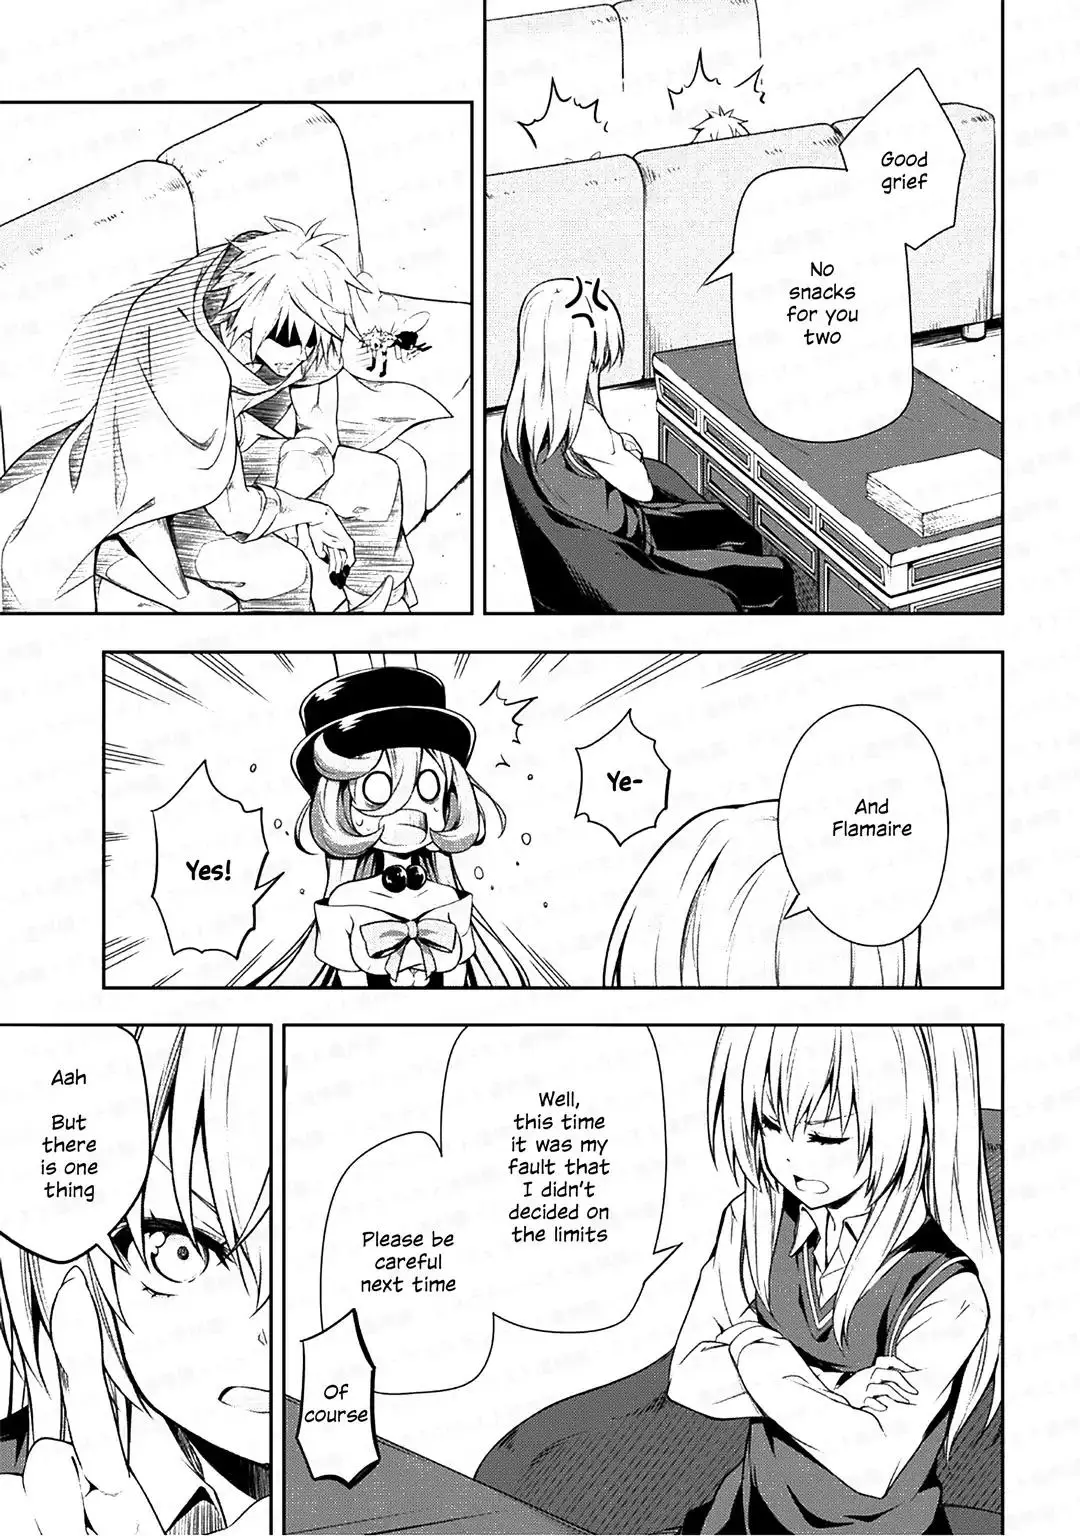 Tensei Shitara Slime Datta Ken: The Ways of Strolling in the Demon Country - 26 page 26